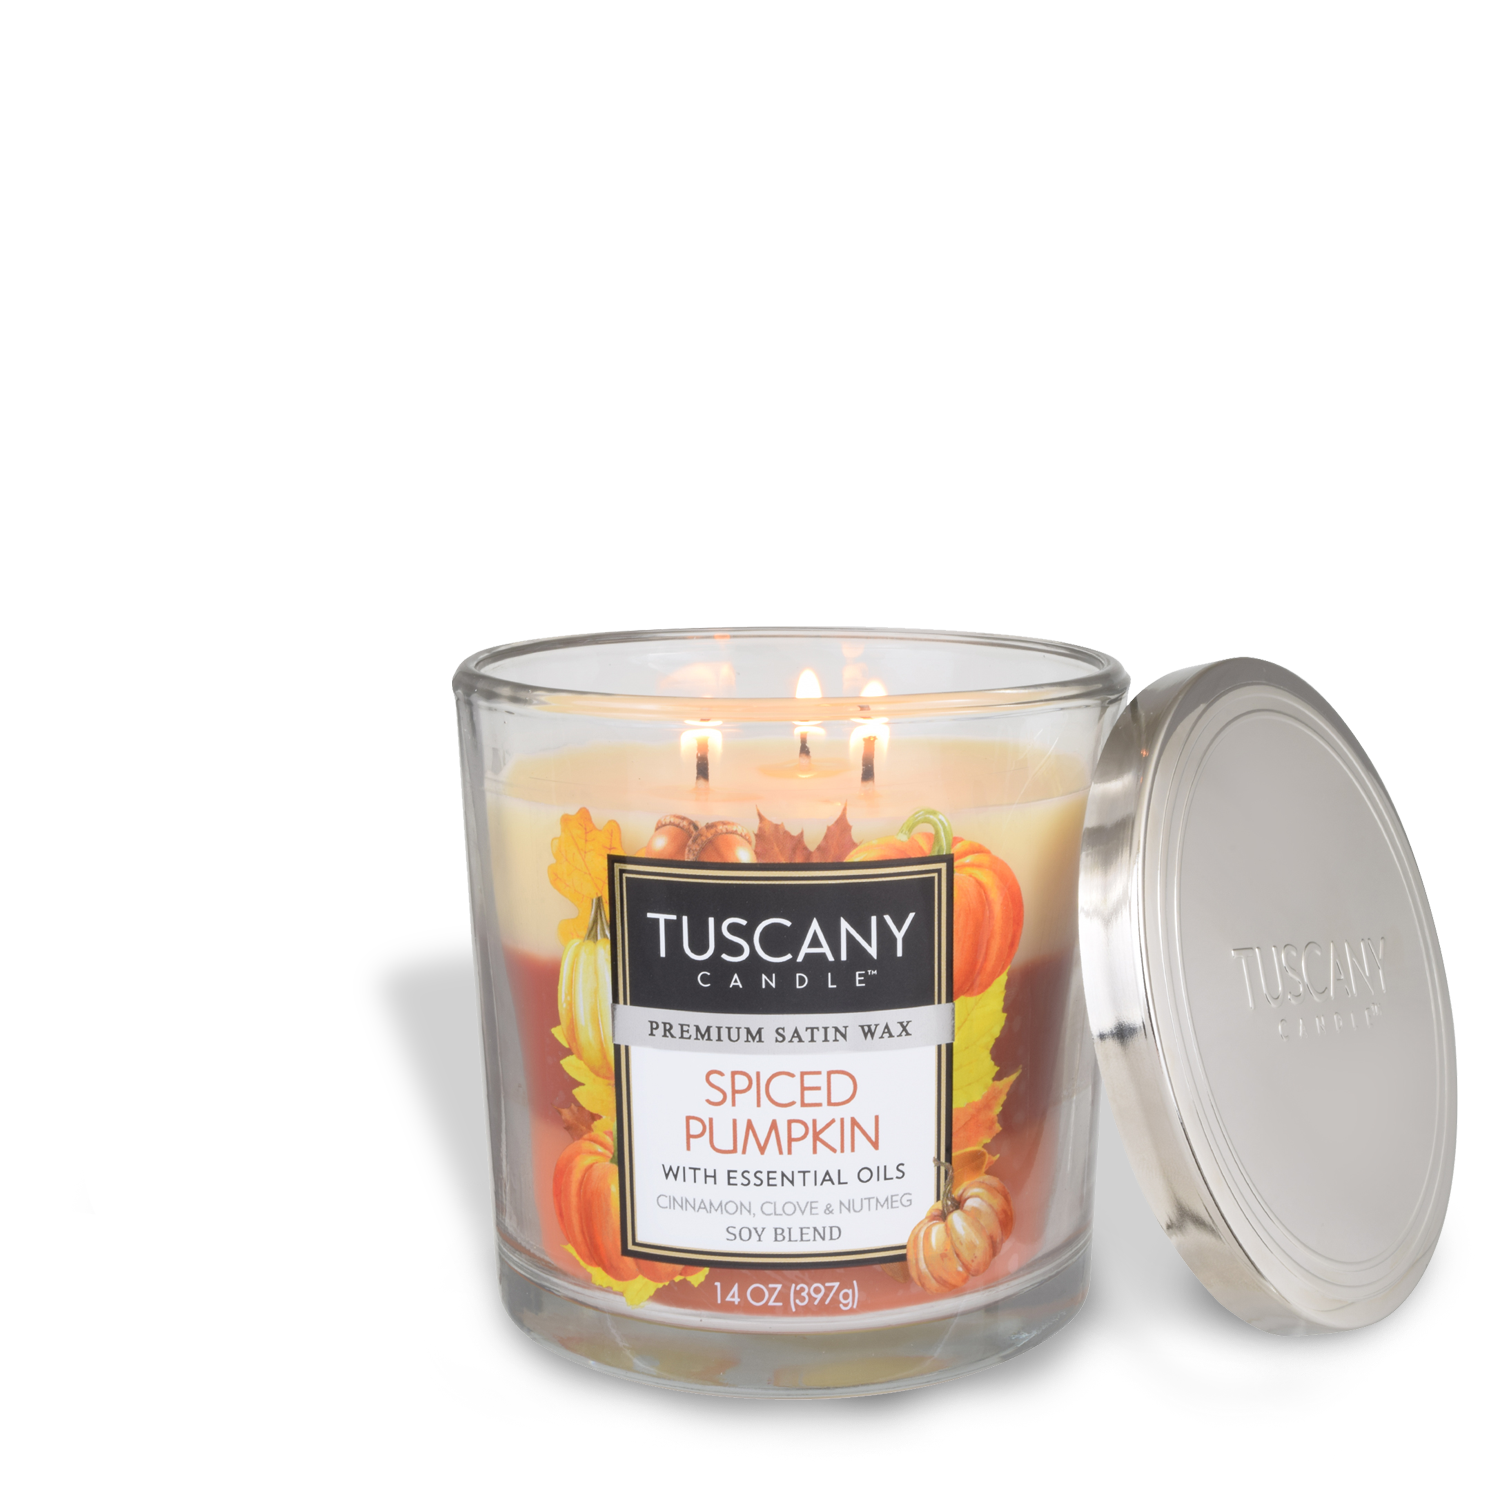 Tuscany Candle Pet Collection Sit, Shake, Roll Over Jar Candle 14 oz